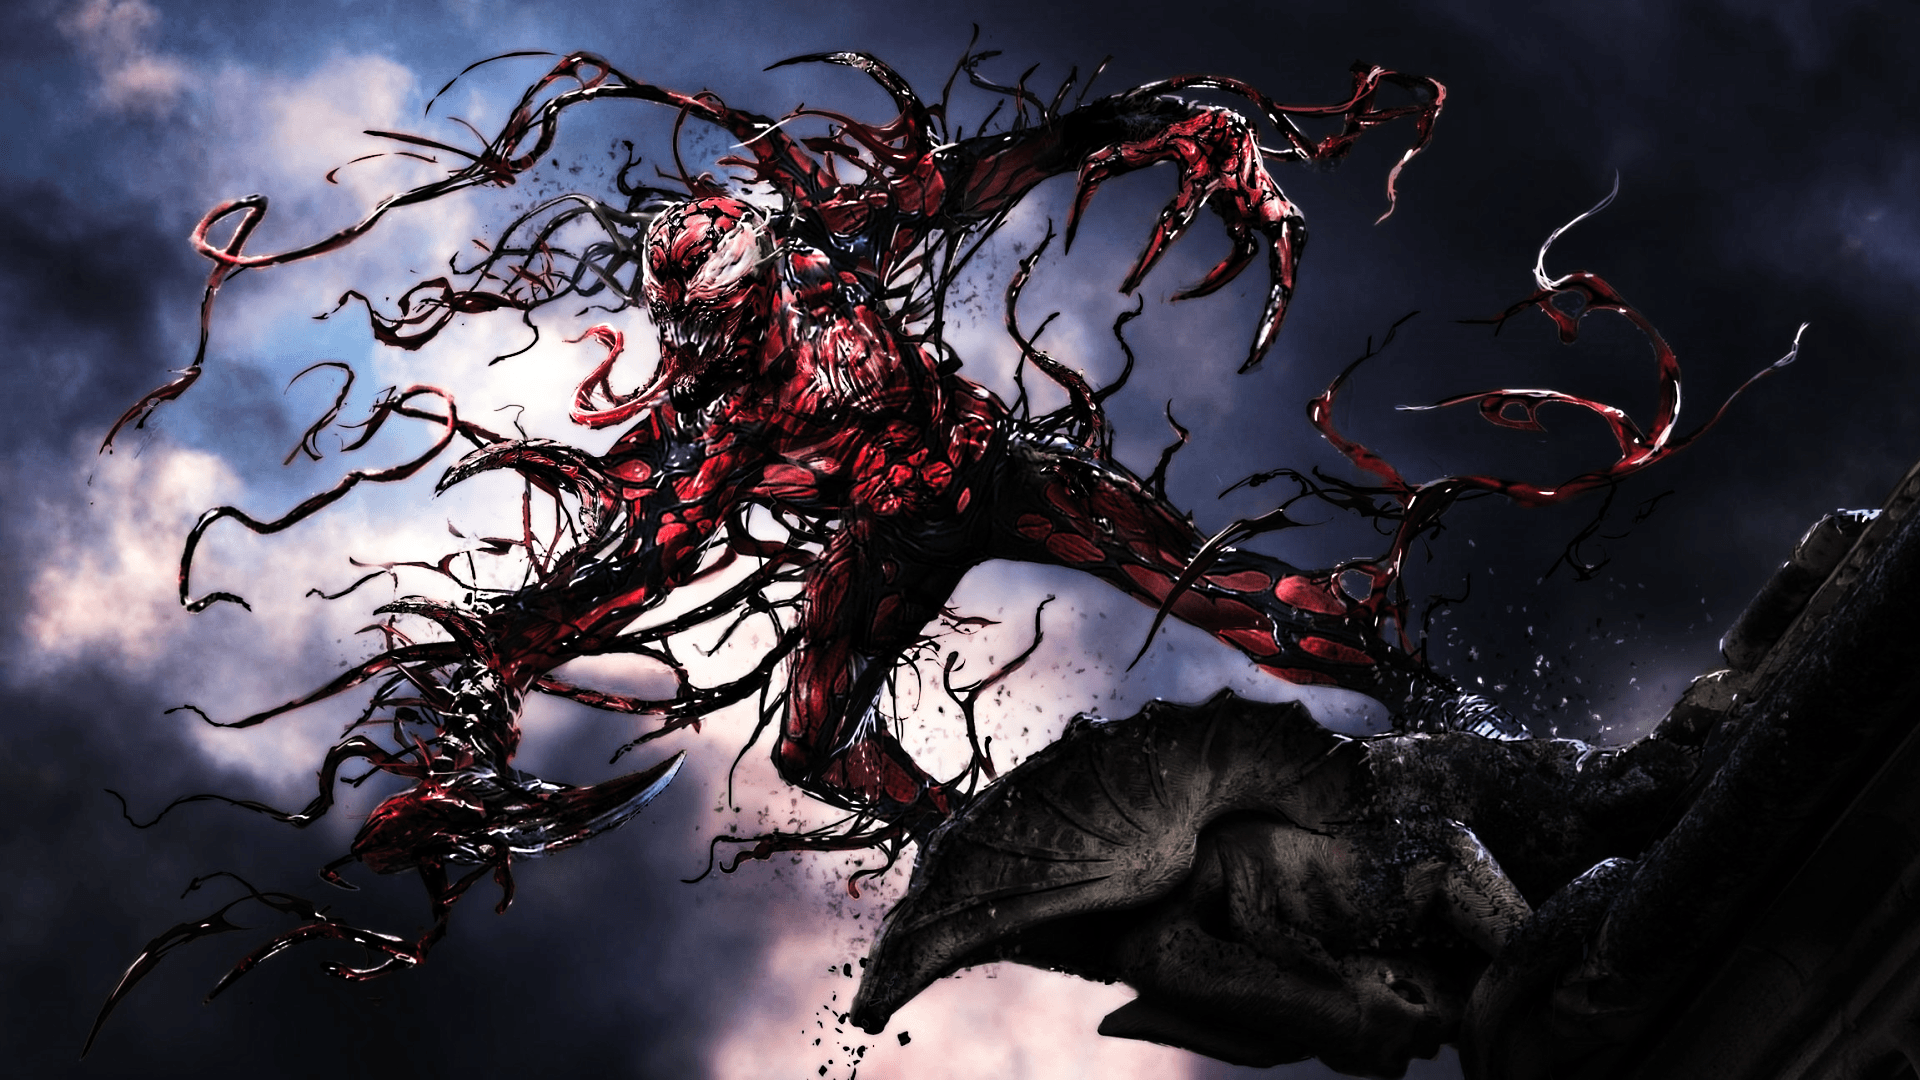 The Amazing Spider Man Carnage Official Poster (A)